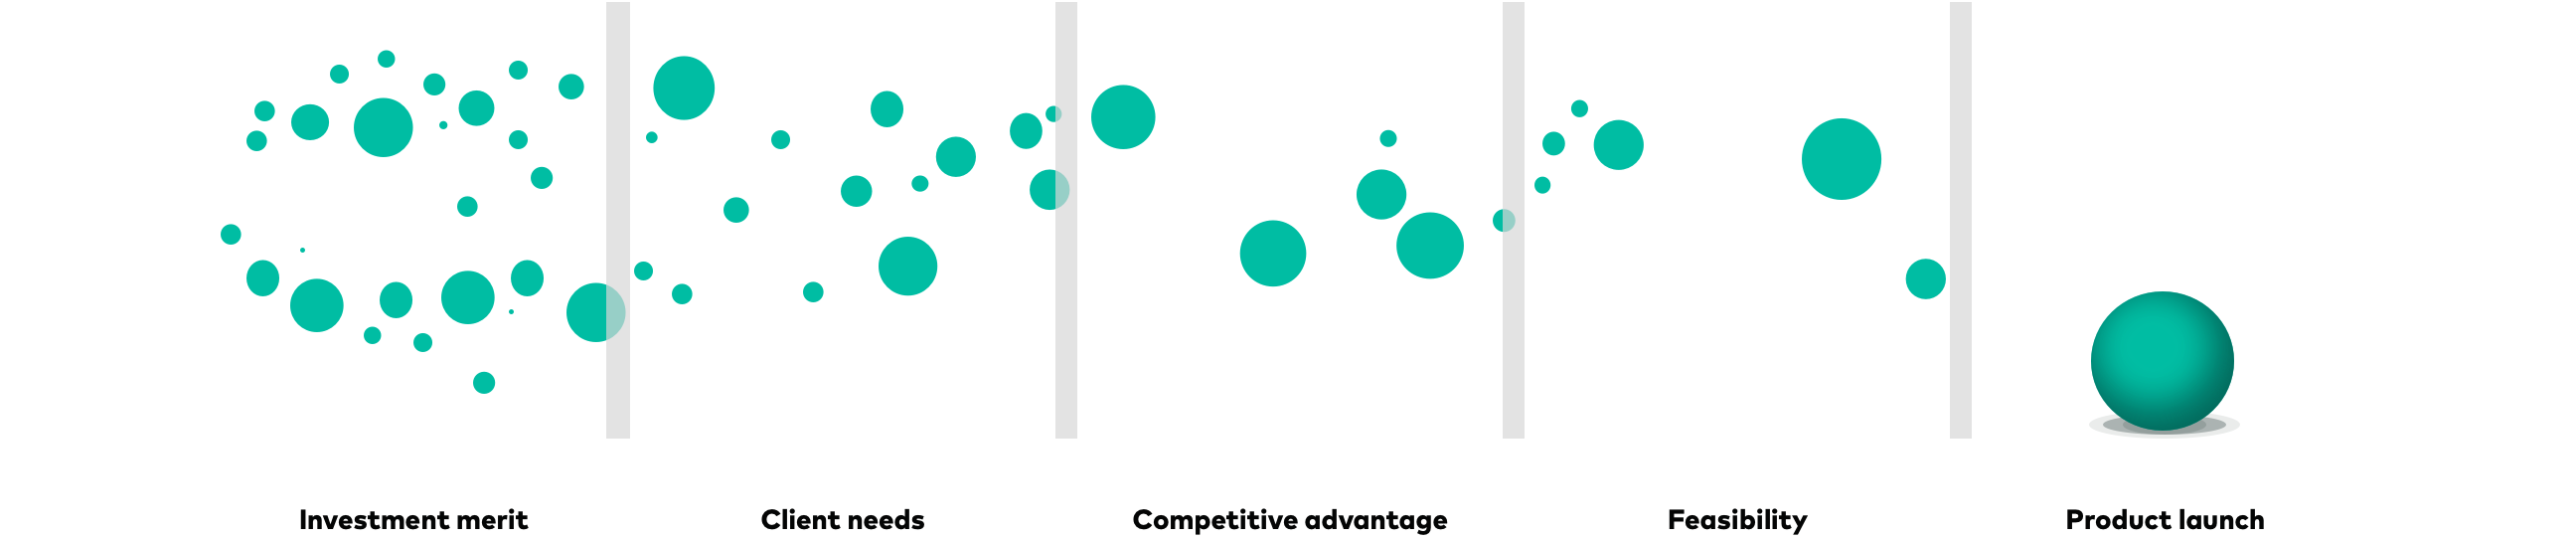 An abstract design representing the consistent set of standards that Vanguard considers before deciding whether to launch a product. For Vanguard to launch a new product, the product must have investment merit, fulfill the long-term needs of its targeted clients, deliver a compelling advantage over competitors, and be feasible to launch from a legal, regulatory, and risk standpoint.